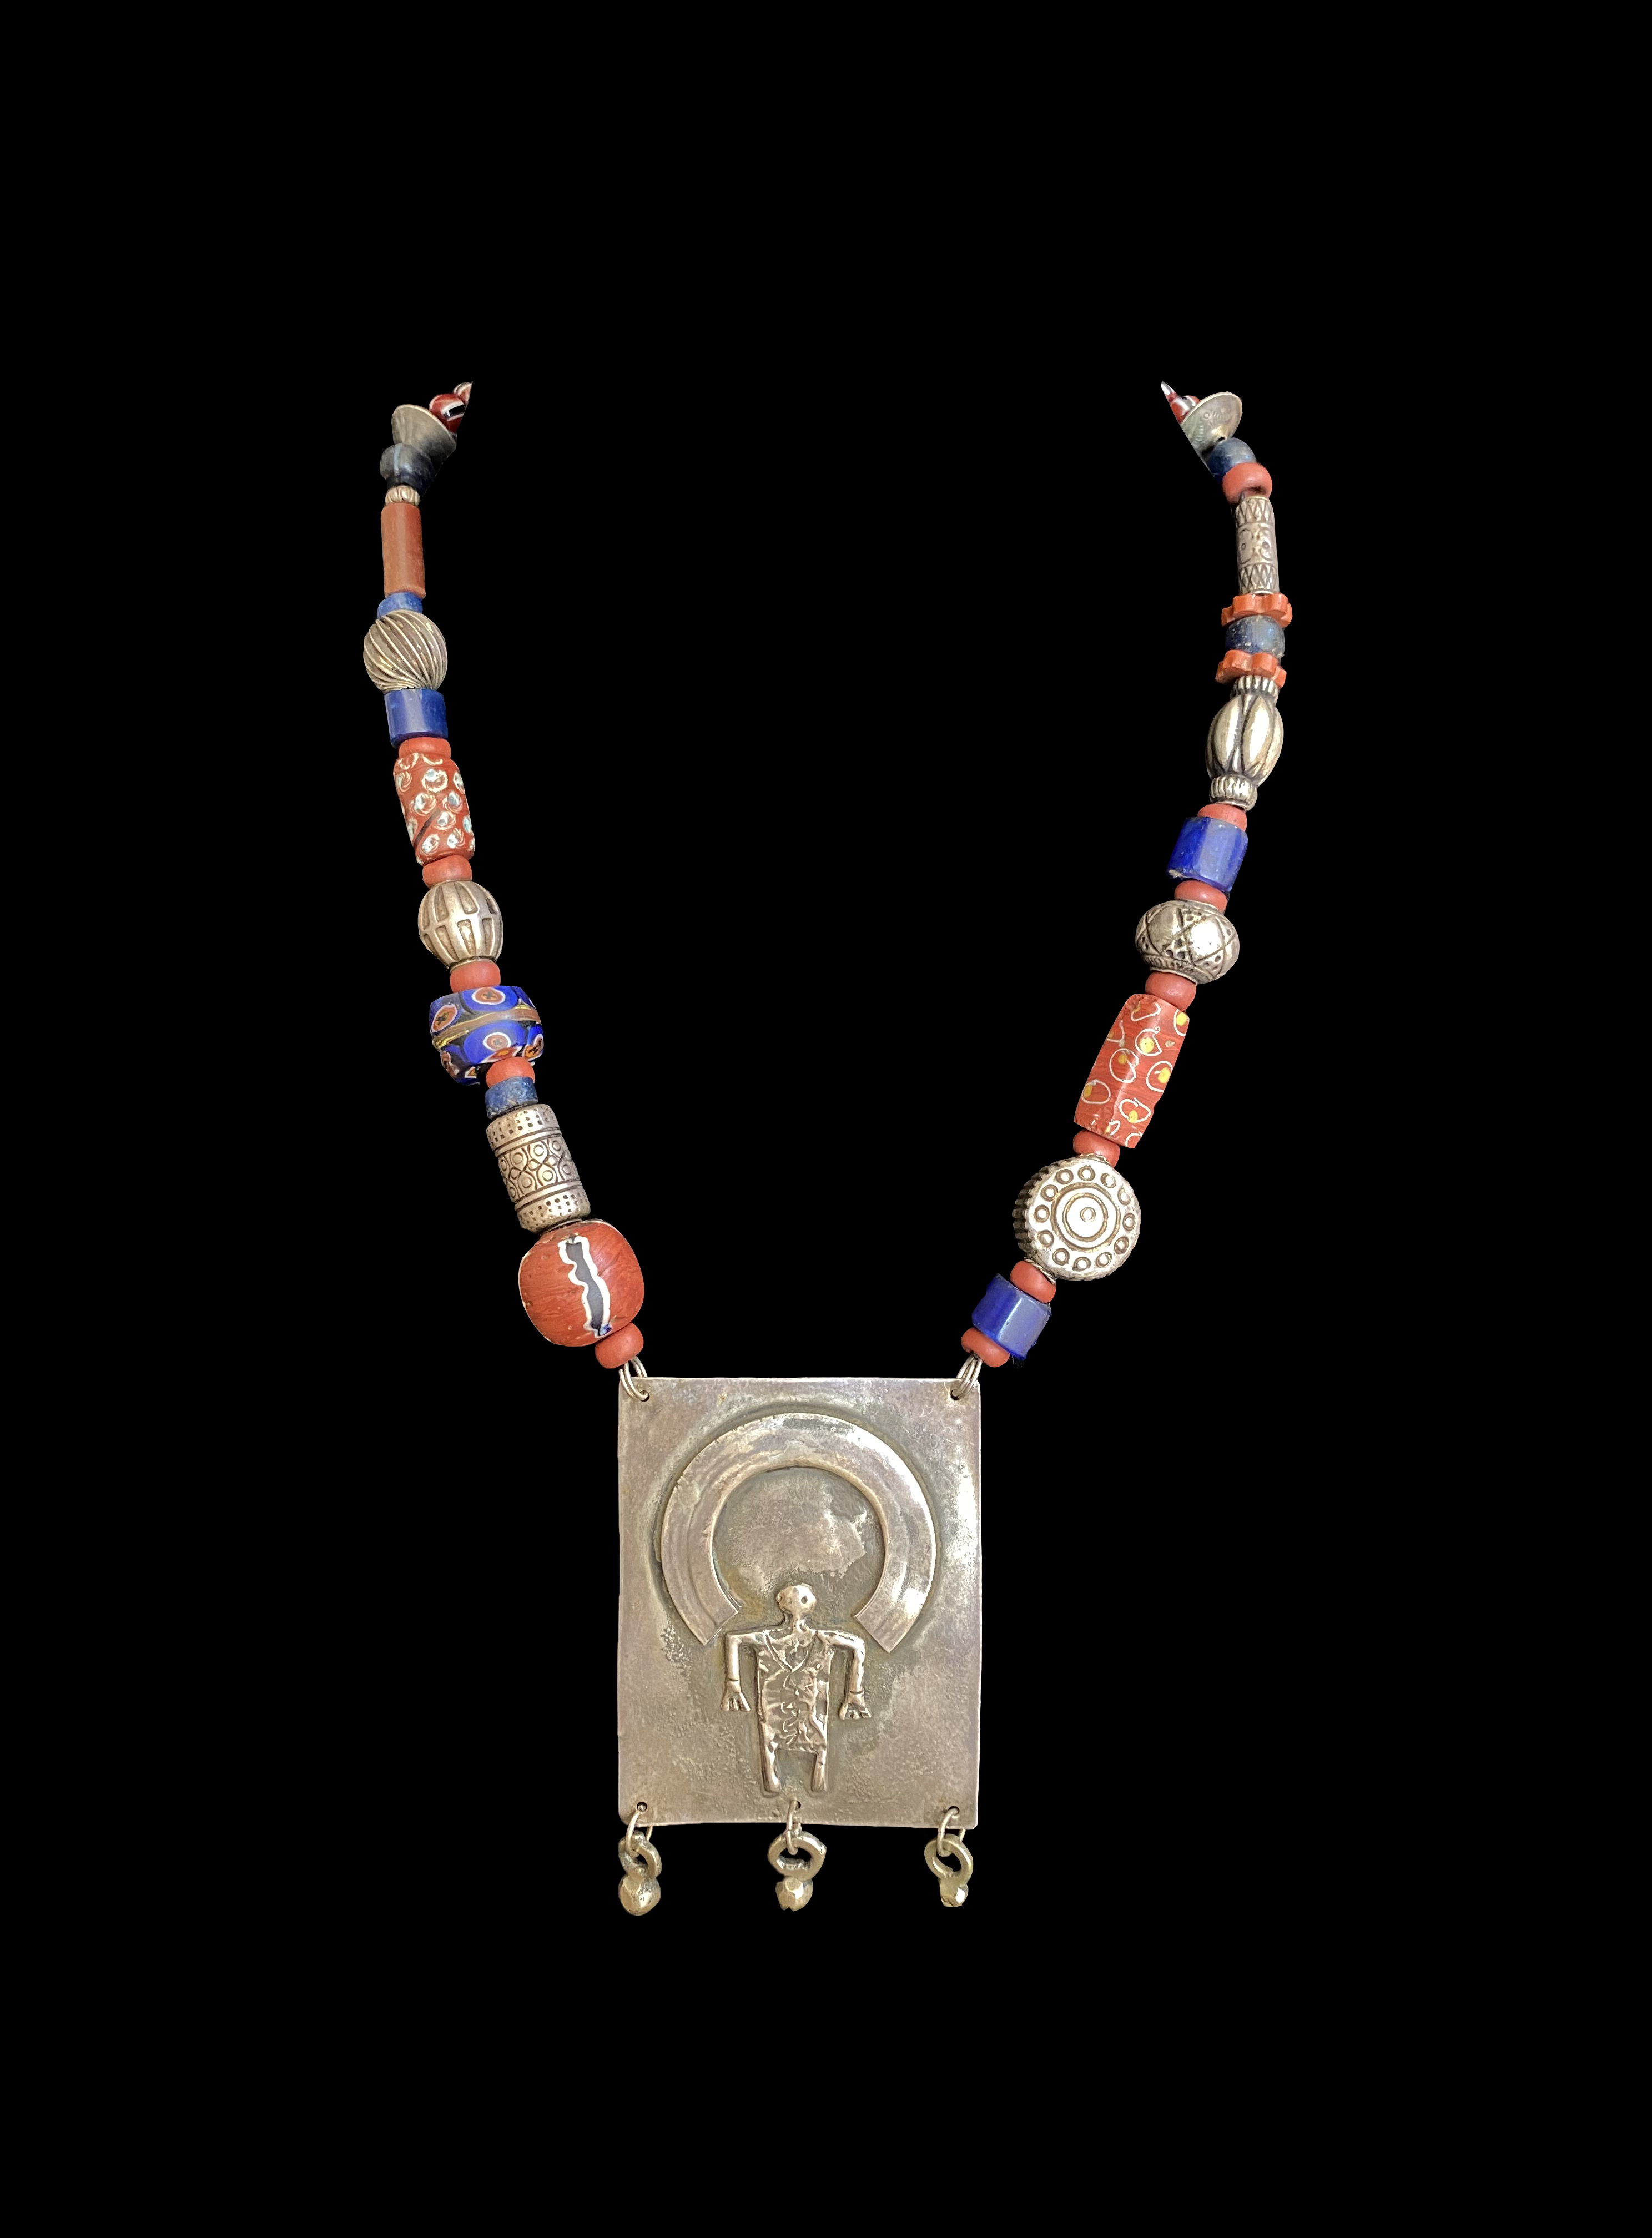 Trade Bead Necklace with Tribal Silver Pendant with Figure